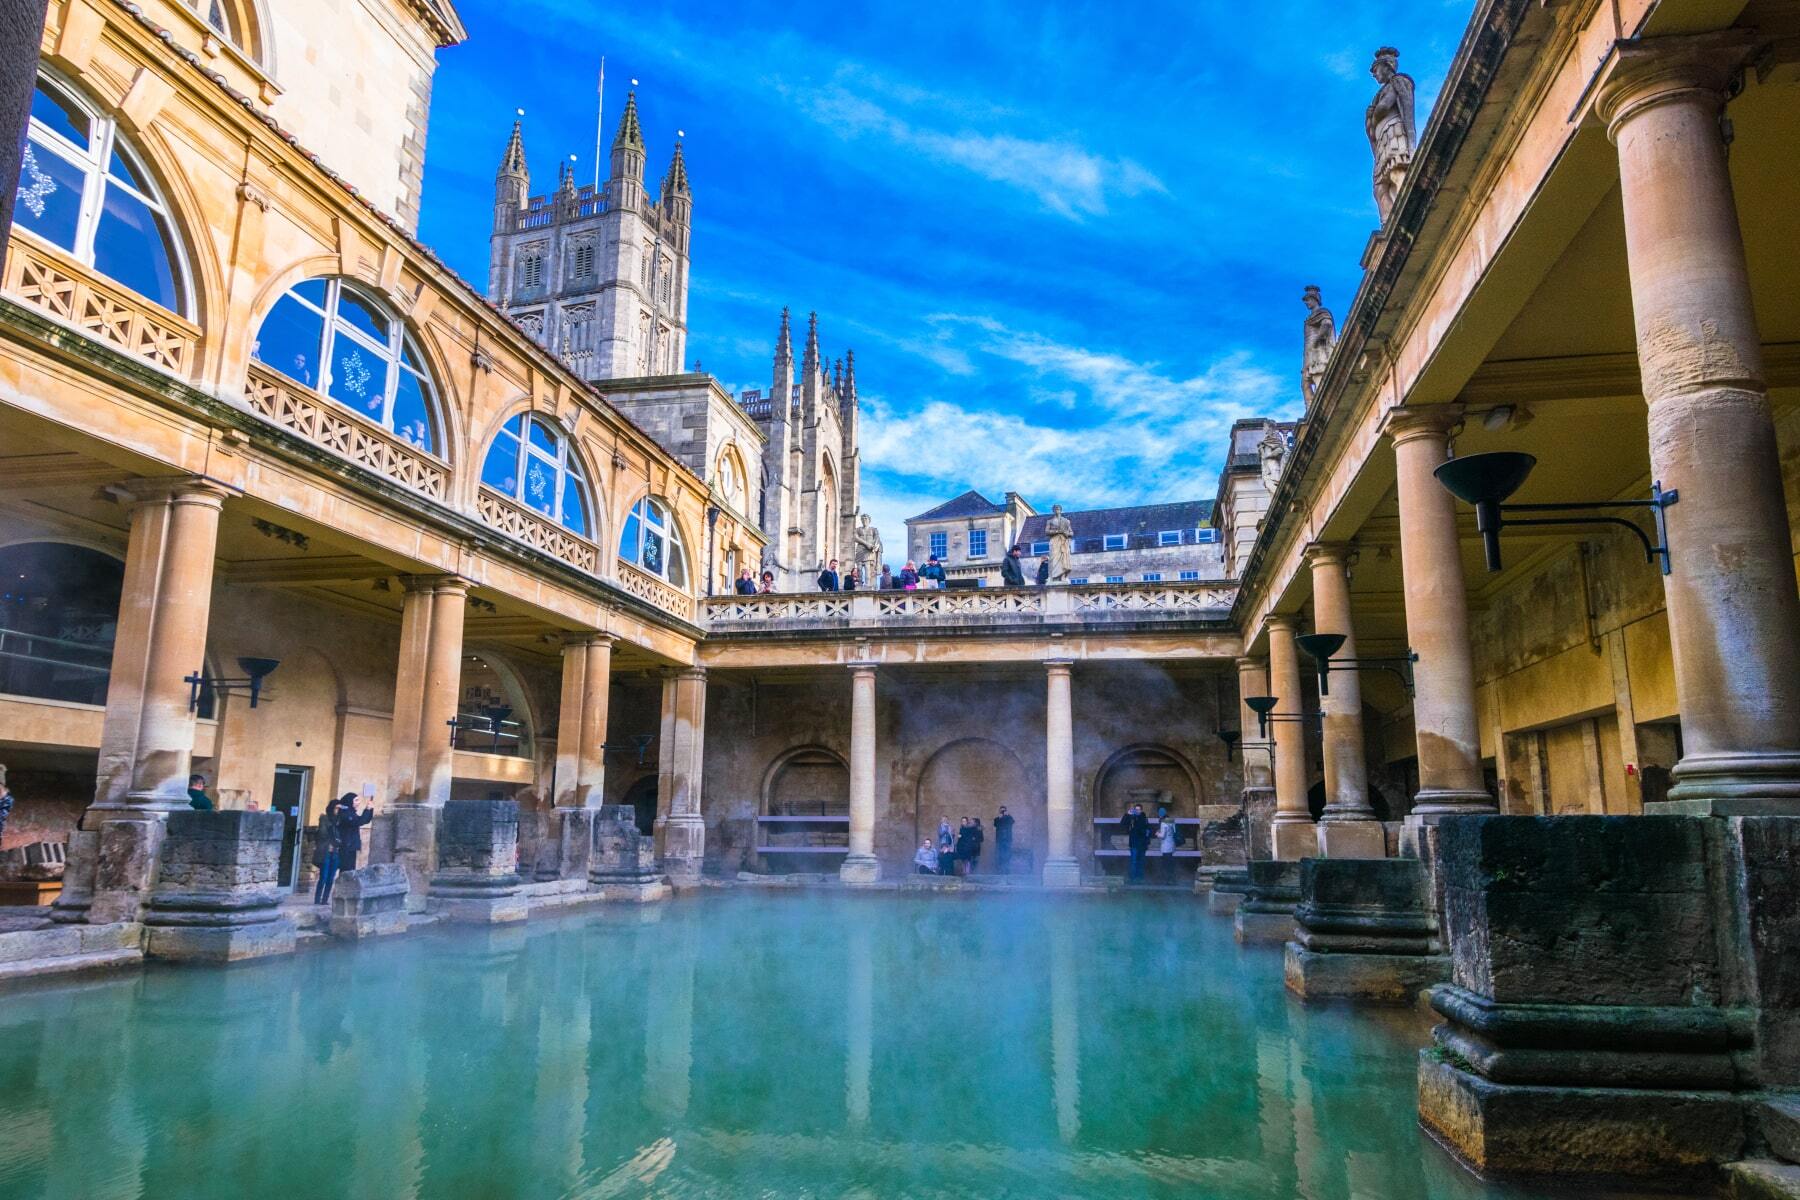 <p>The <a href="https://visitbath.co.uk/inspire-me/literary-bath/jane-austen-bath" class="atom_link atom_valid" rel="noreferrer noopener">city of Bath</a> is aptly named, since it started out as a thermal spa more than 2,000 years ago. It’s home to many relics from centuries past as well as many modern thermal baths, including the Thermae Bath Spa. It may be small, but Bath is considered one of the prettiest cities in England, and its quaint streets and Georgian architecture will make you feel like you’re in a <a href="https://janeausten.co.uk" class="atom_link atom_valid" rel="noreferrer noopener">Jane Austen</a> novel.</p>